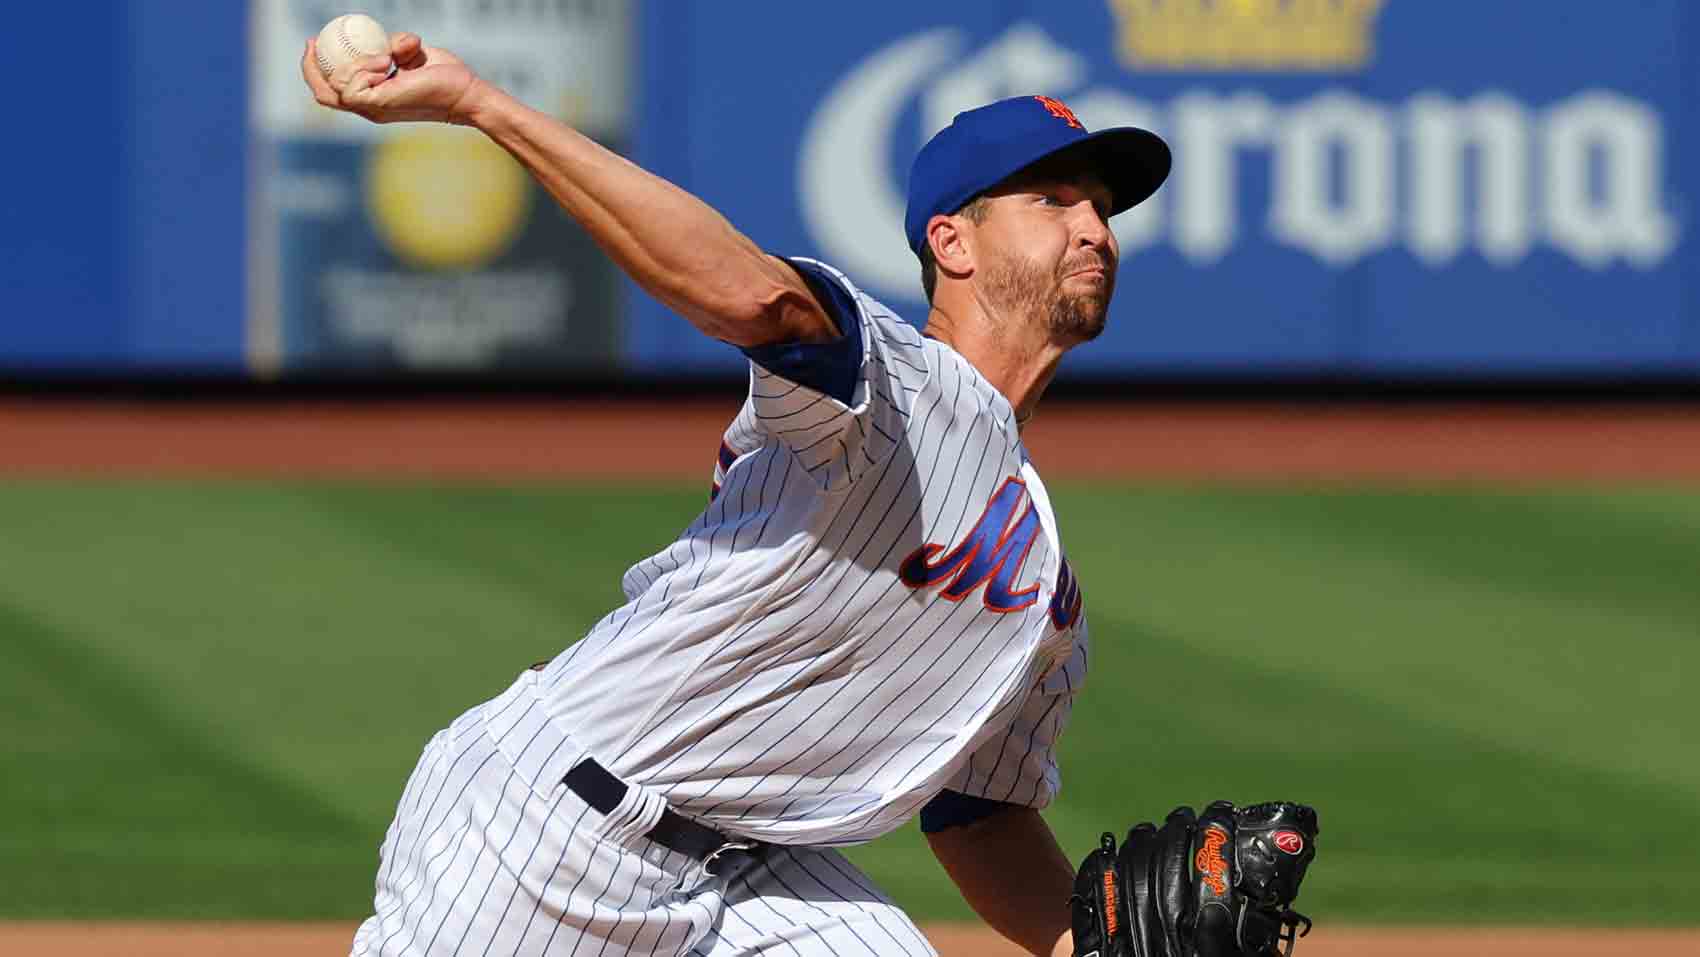 Backed by 5 home runs, DeGrom leads Mets past Yankees